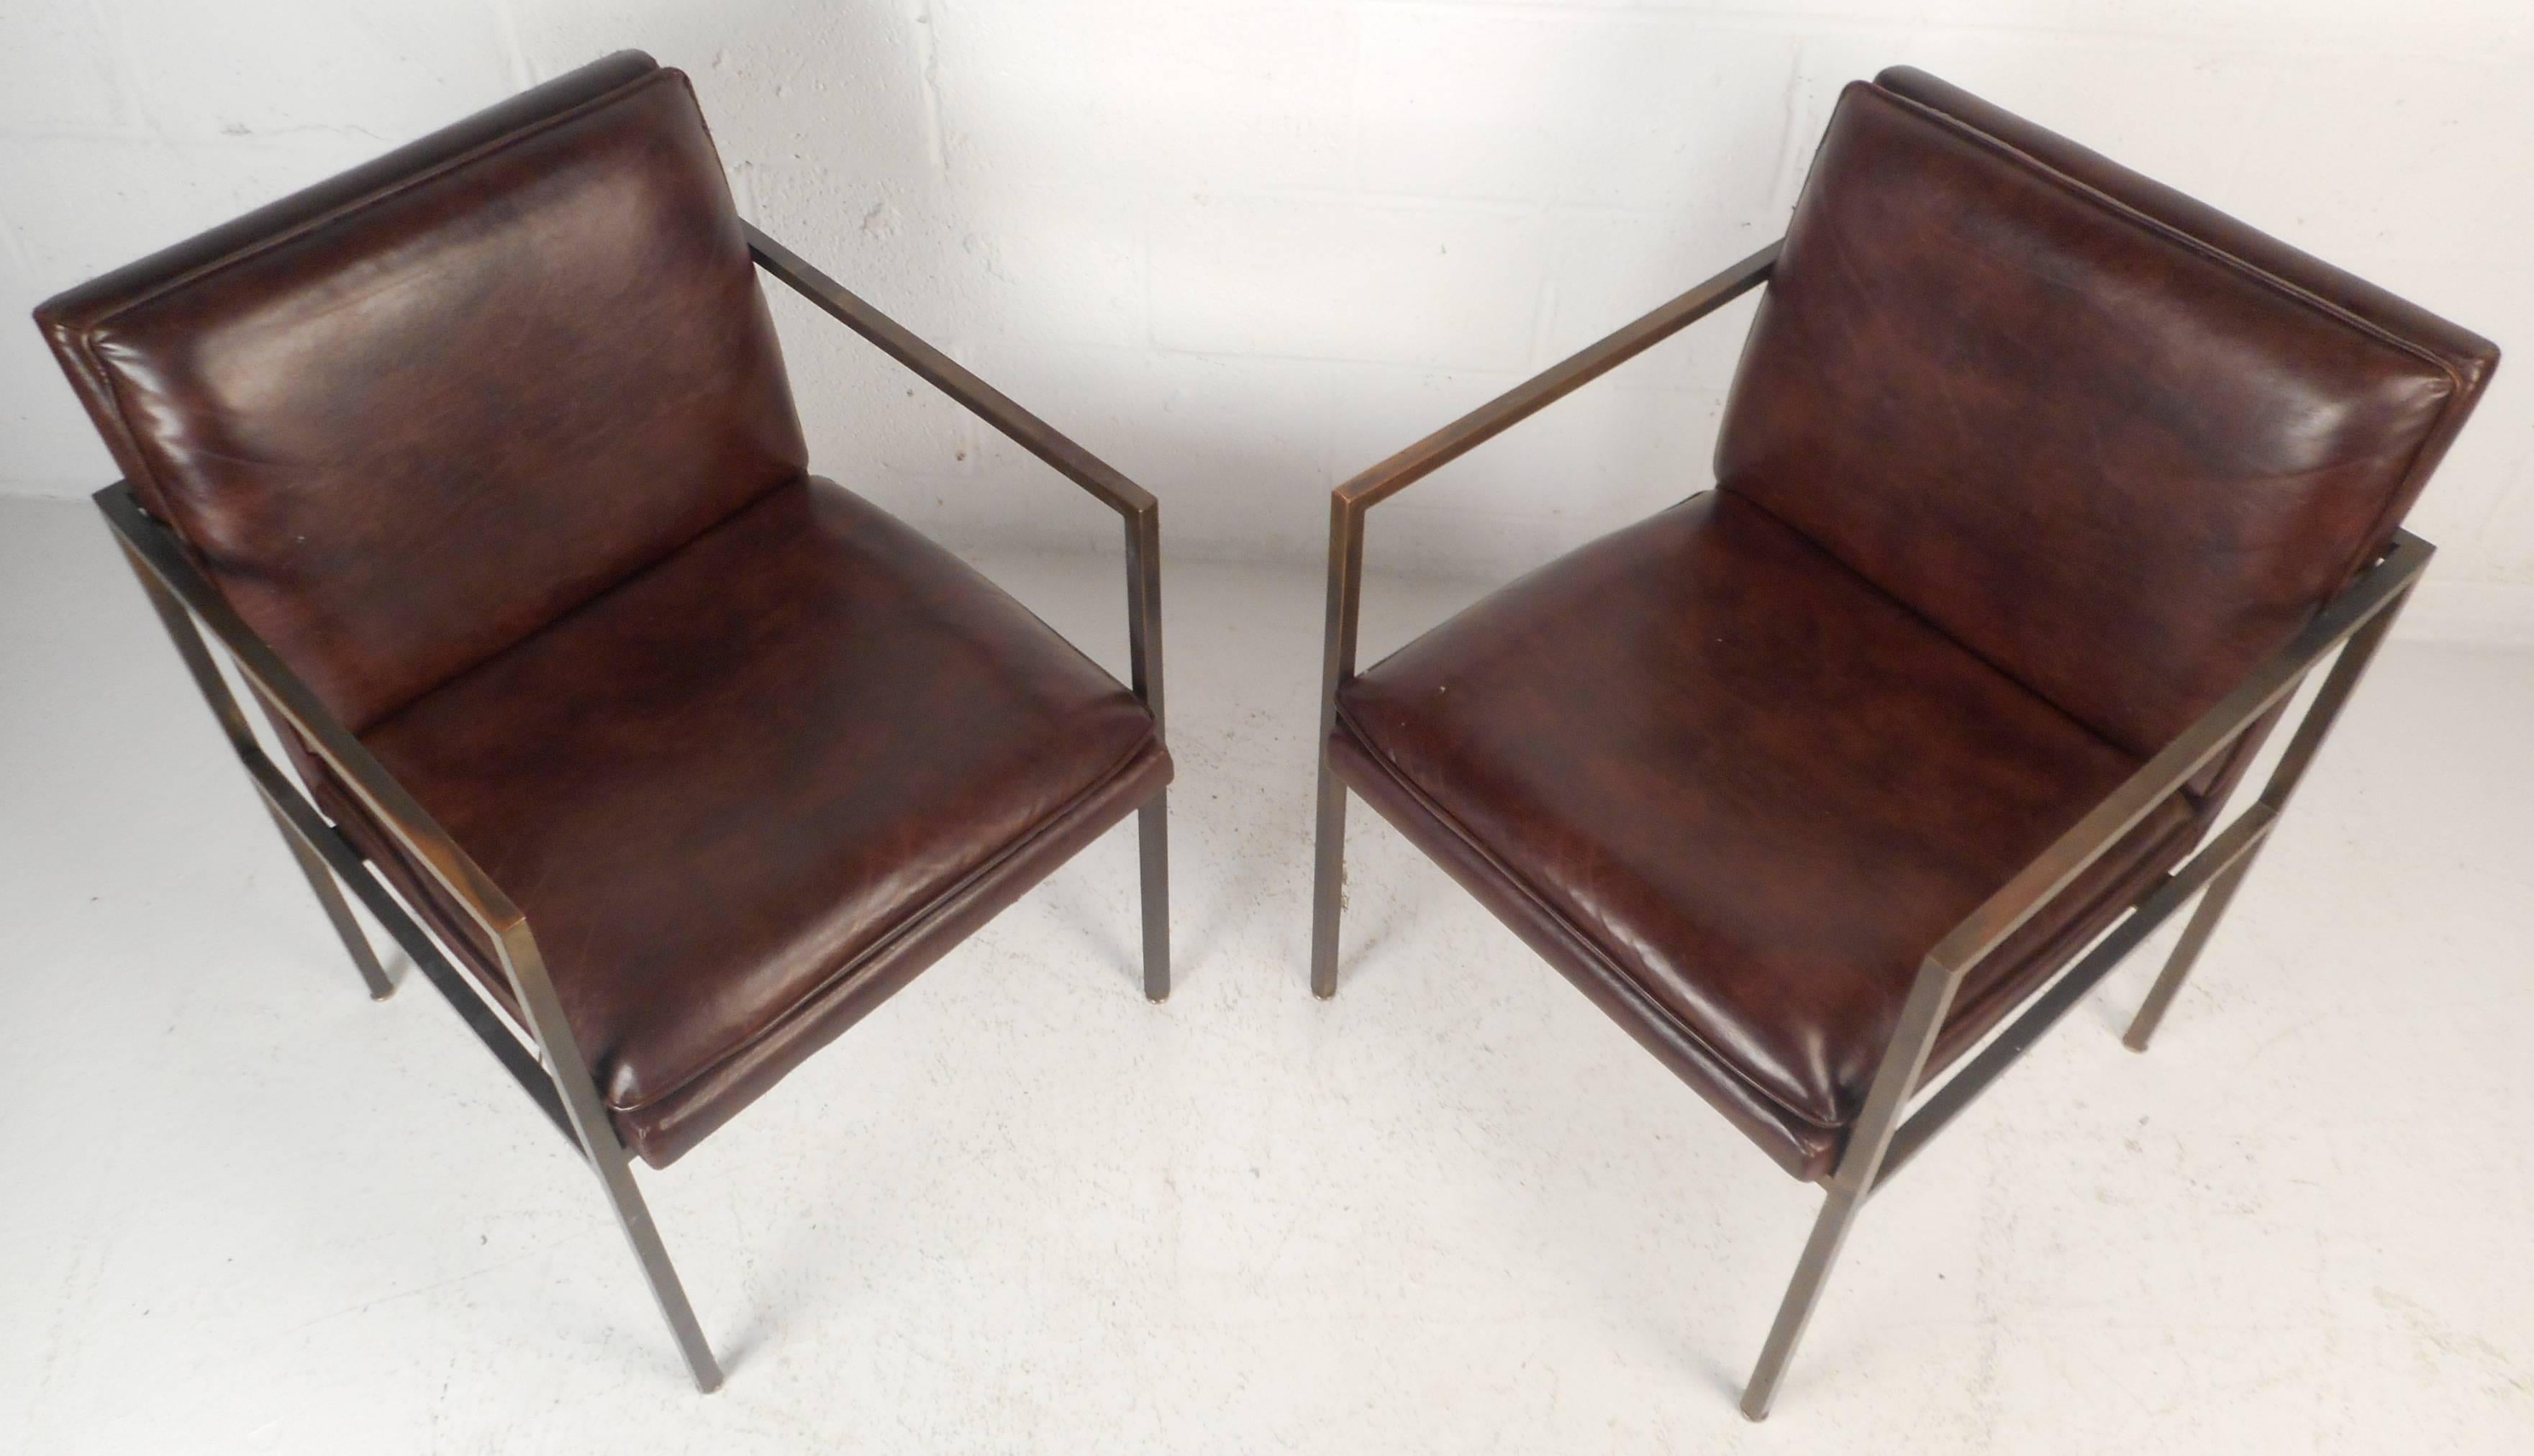 American Pair of Mid-Century Modern Brass and Vinyl Armchairs by Tulip Inc